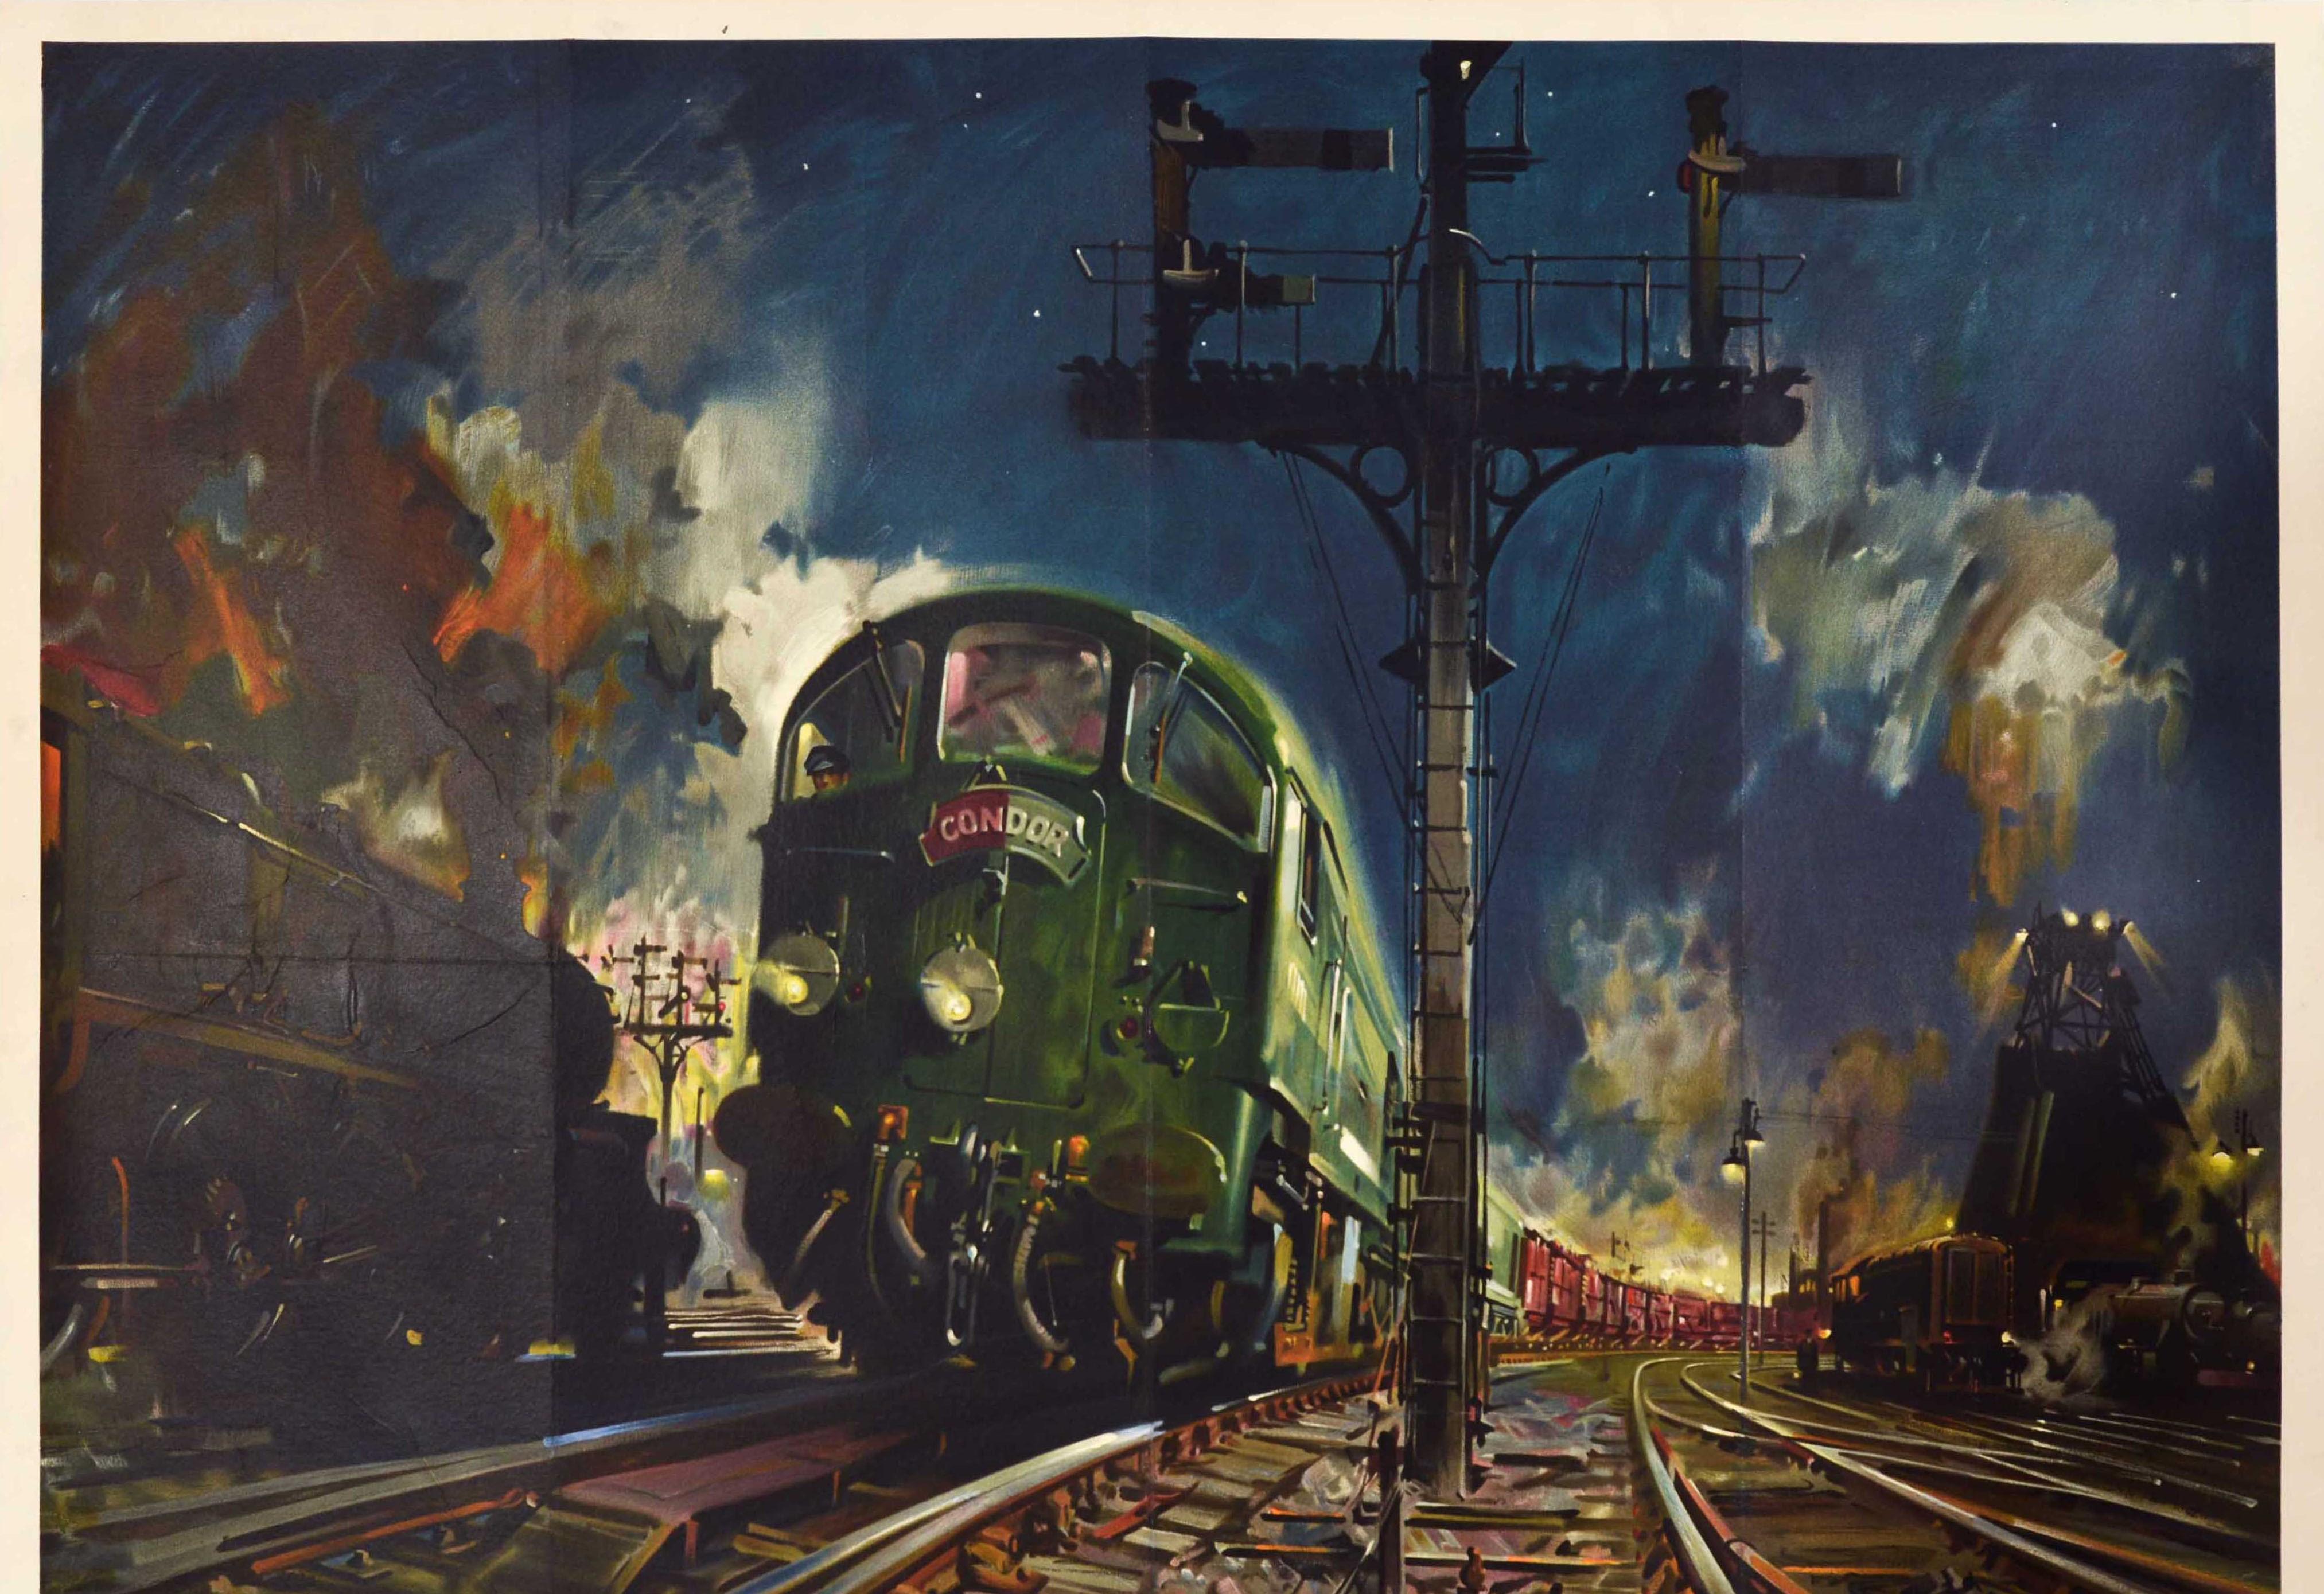 Original Vintage British Rail Poster Night Freight Train Condor London Glasgow - Print by Terence Cuneo